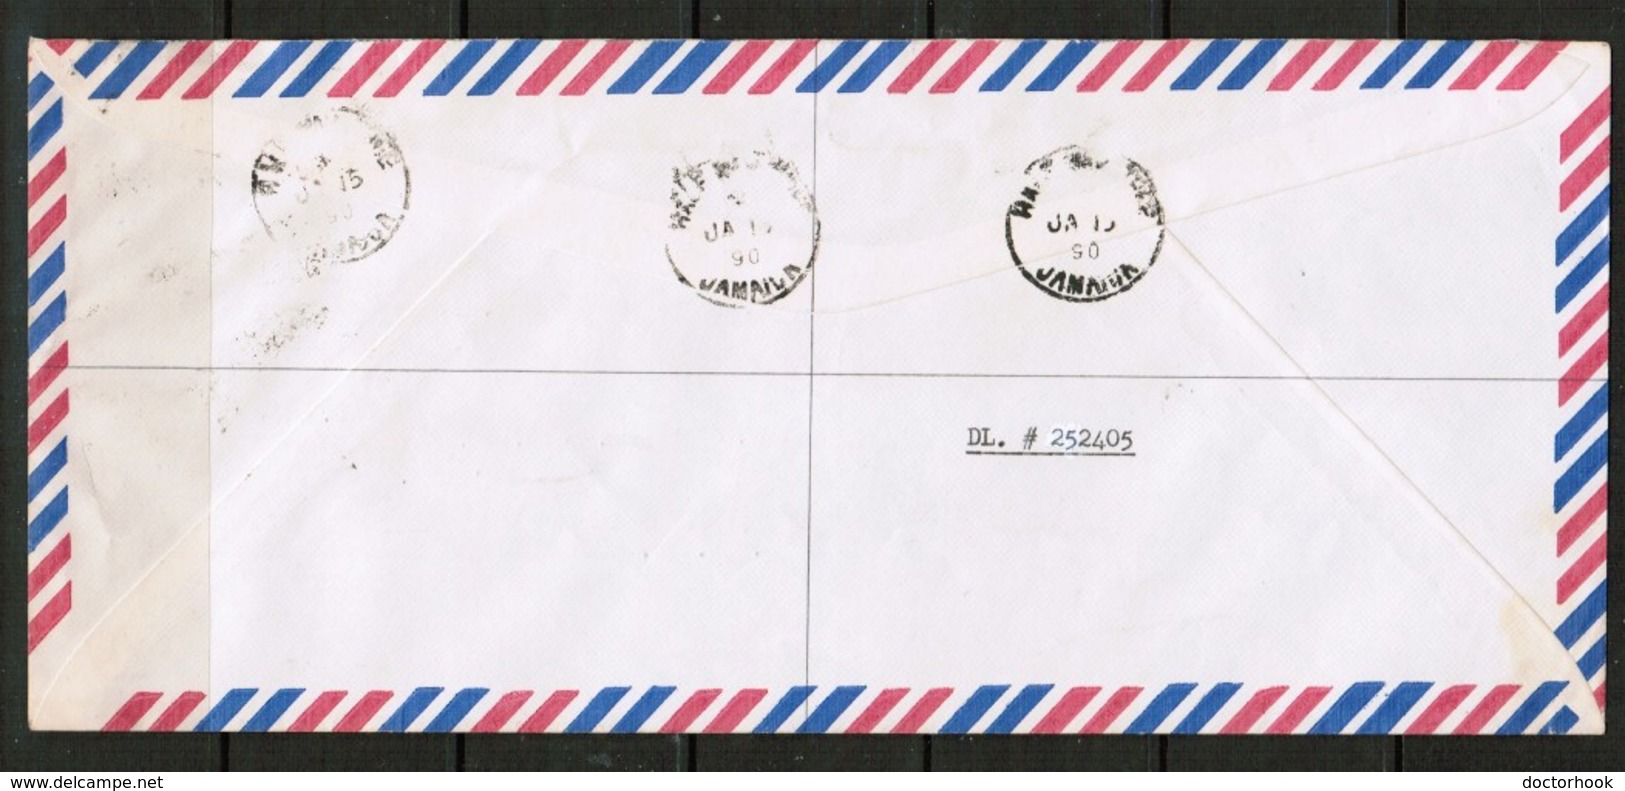 JAMAICA   Scott # 610 & 707 On REGISTERED AIRMAIL COMMERCIAL COVER To U.S.A. (JAN/15/90) (OS-489) - Jamaica (1962-...)